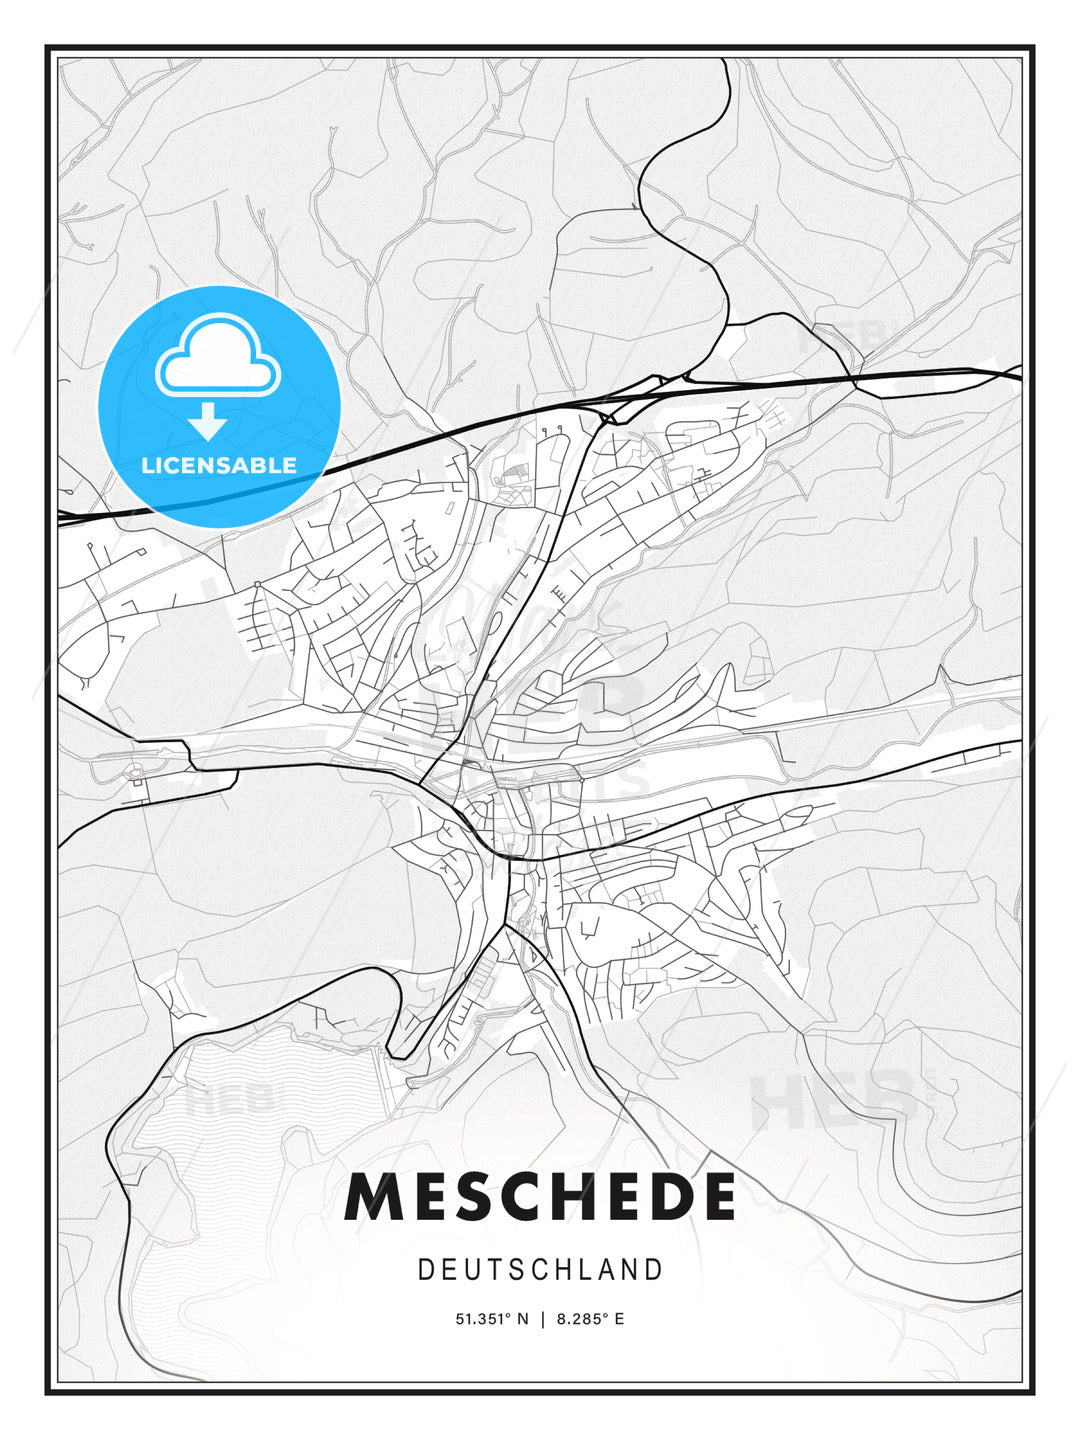 Meschede, Germany, Modern Print Template in Various Formats - HEBSTREITS Sketches